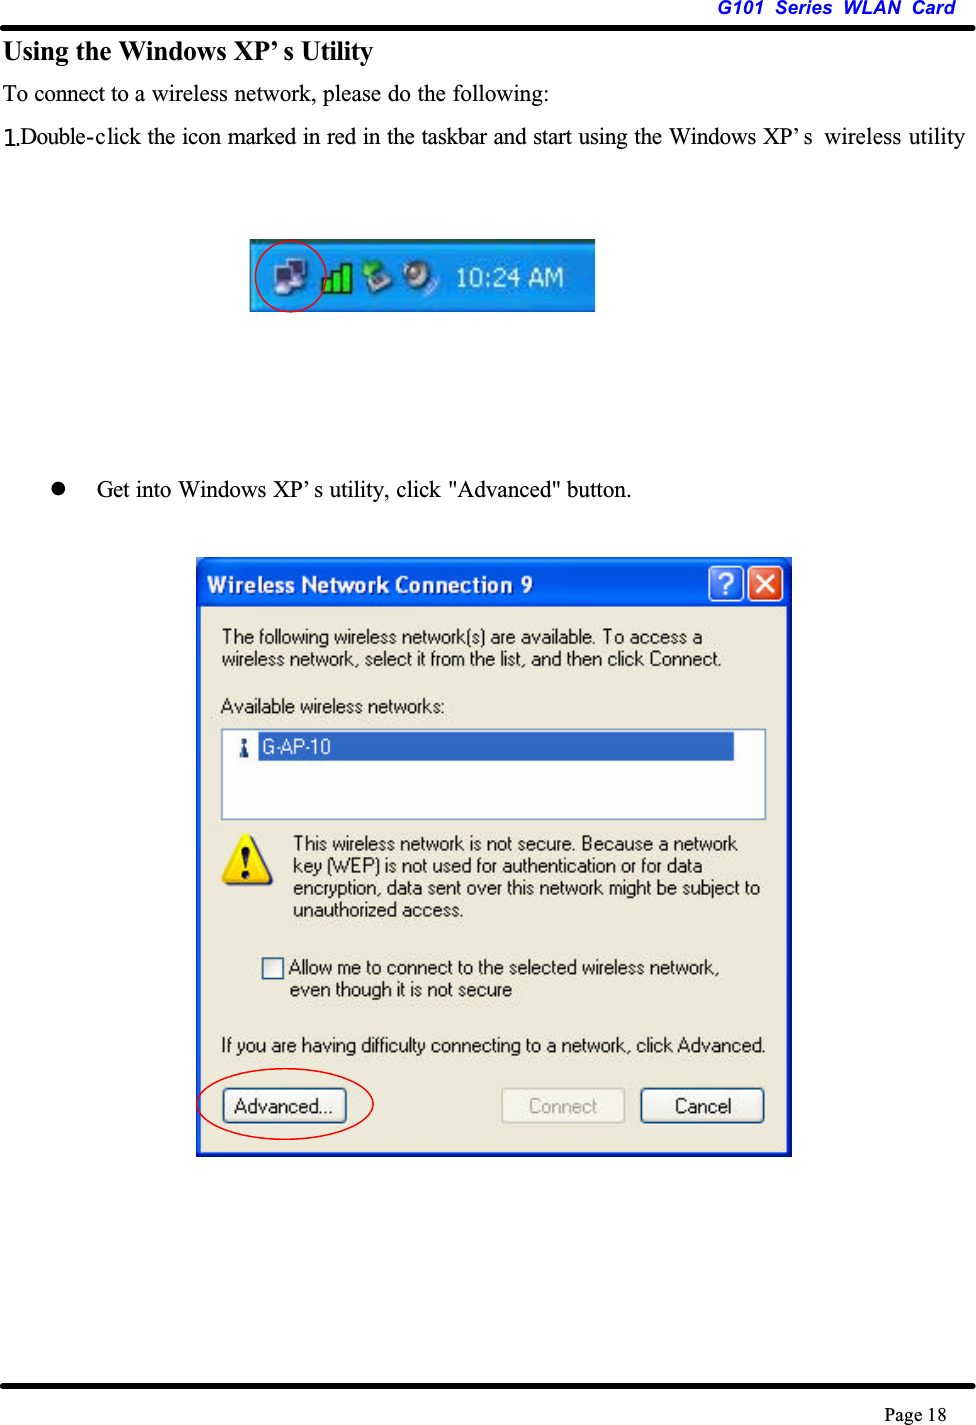 G101 Series WLAN CardPage 18Using the Windows XP’ s UtilityTo connect to a wireless network, please do the following:1.Double-click the icon marked in red in the taskbar and start using the Windows XP’ s wireless utilityzGet into Windows XP’ s utility, click &quot;Advanced&quot; button.